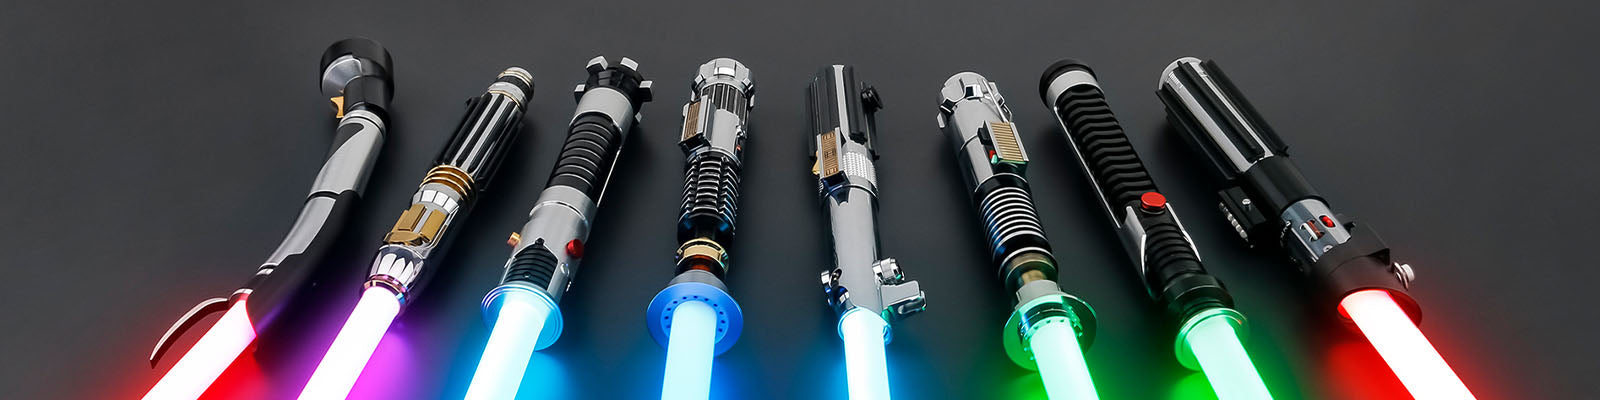 Newly Released Lightsabers